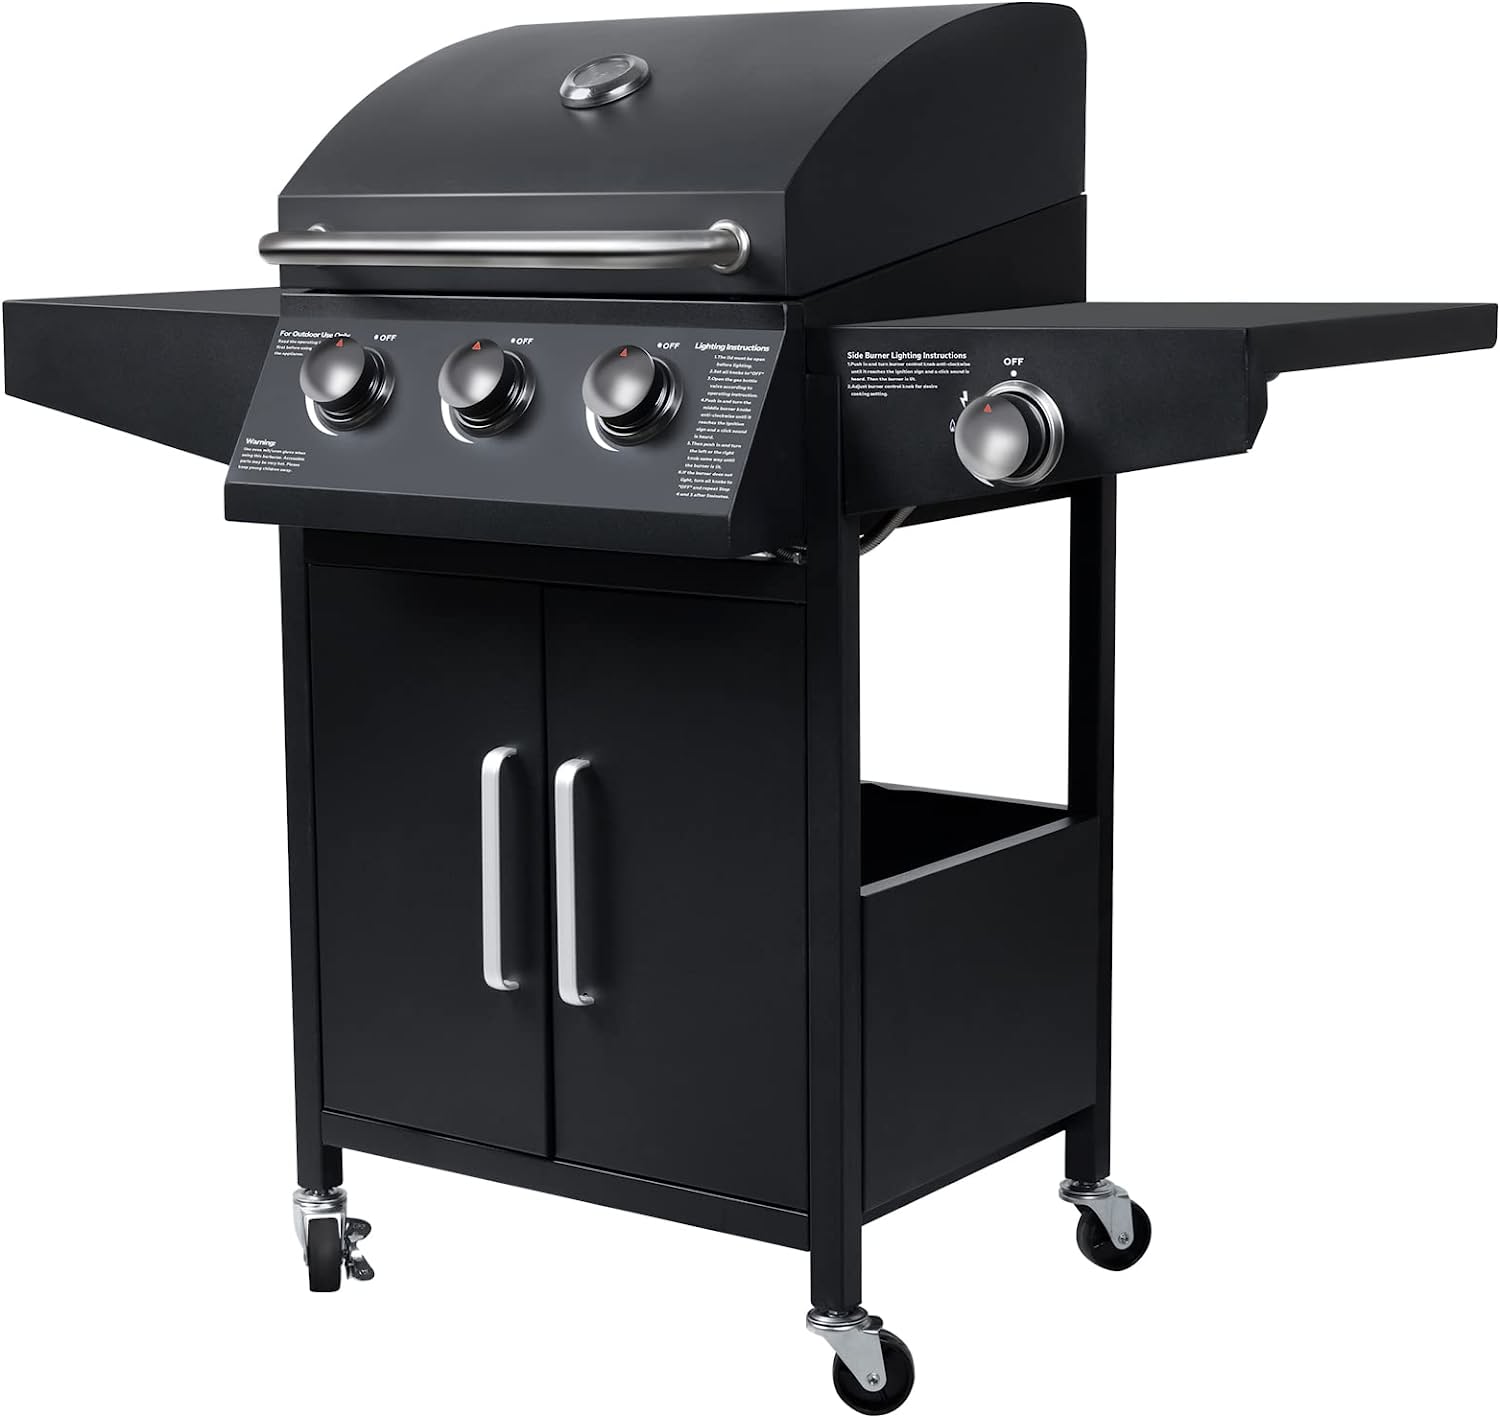 FULLWATT Propane Gas Grill, Stainless Steel Liquid Propane Gas Grill with Side Burner, Cabinet Style BBQ Grill Gas for Outdoor, Patio, Garden (3 BURNER) - image 3 of 7